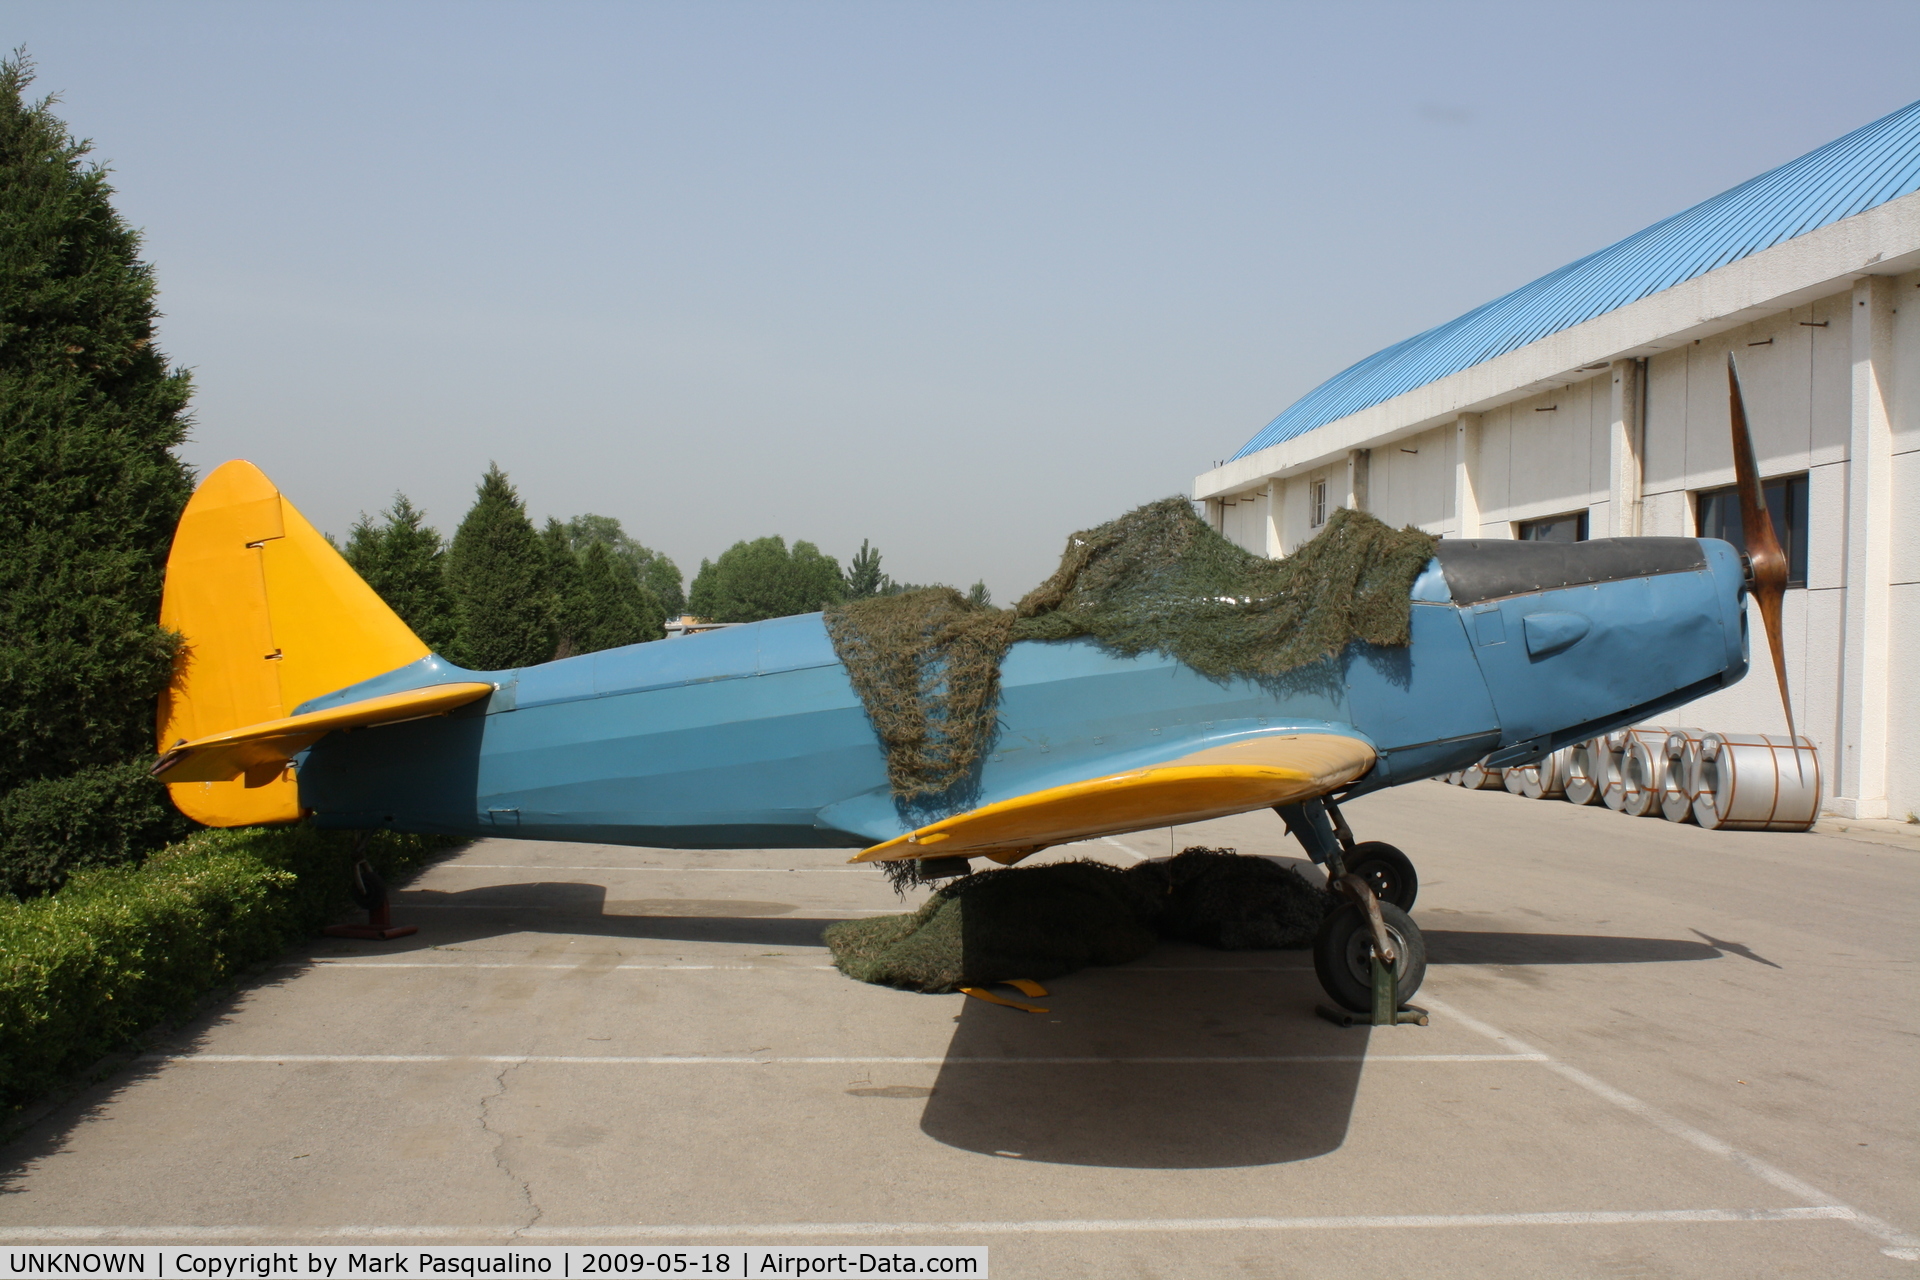 UNKNOWN, Miscellaneous Various C/N unknown, Fairchild PT-19A  Located at Datangshan, China